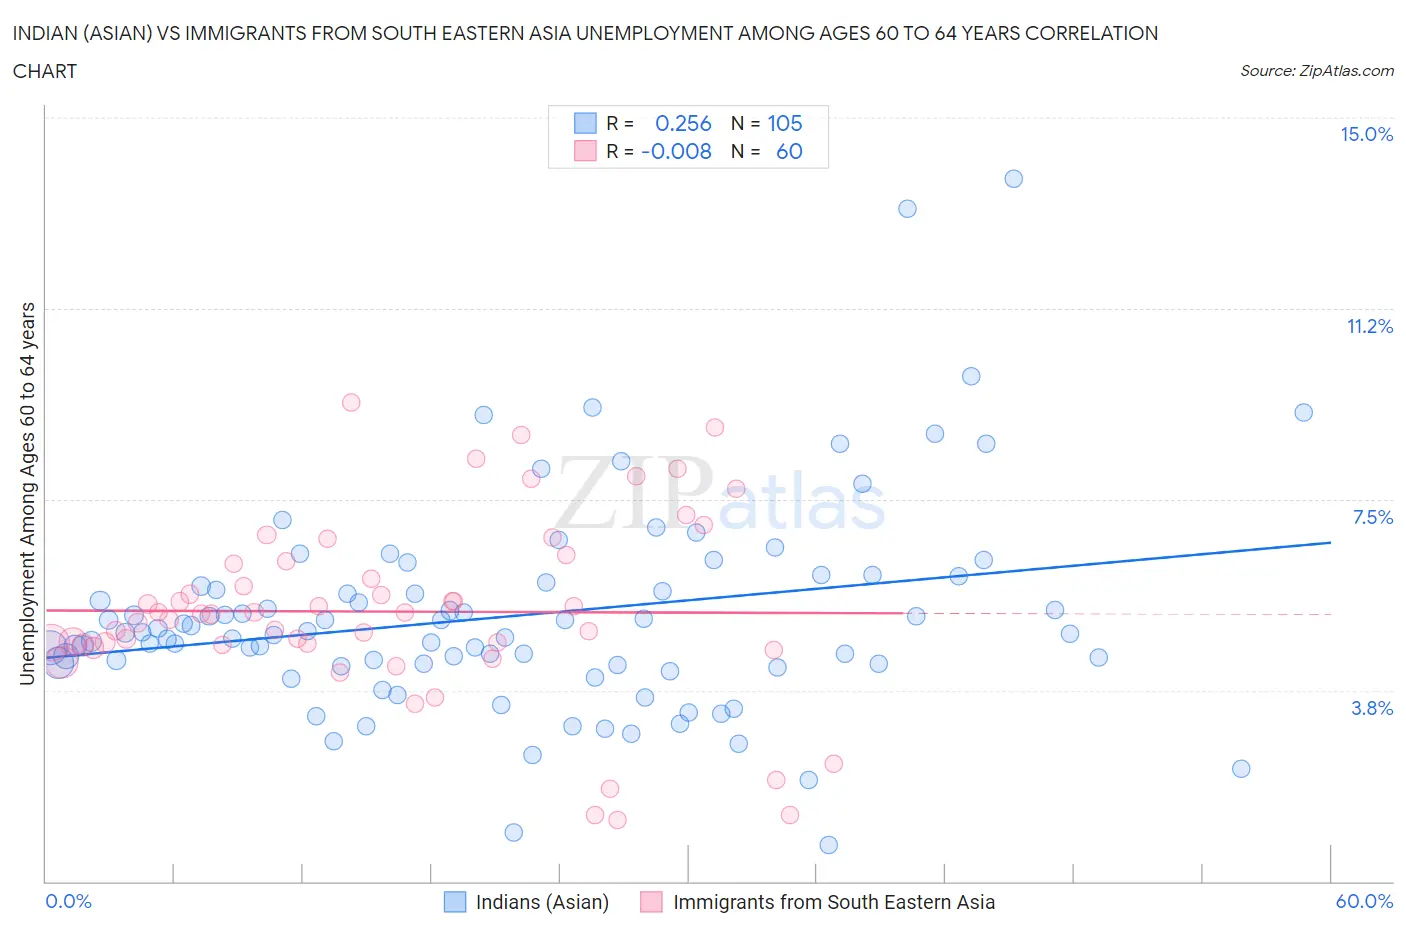 Indian (Asian) vs Immigrants from South Eastern Asia Unemployment Among Ages 60 to 64 years